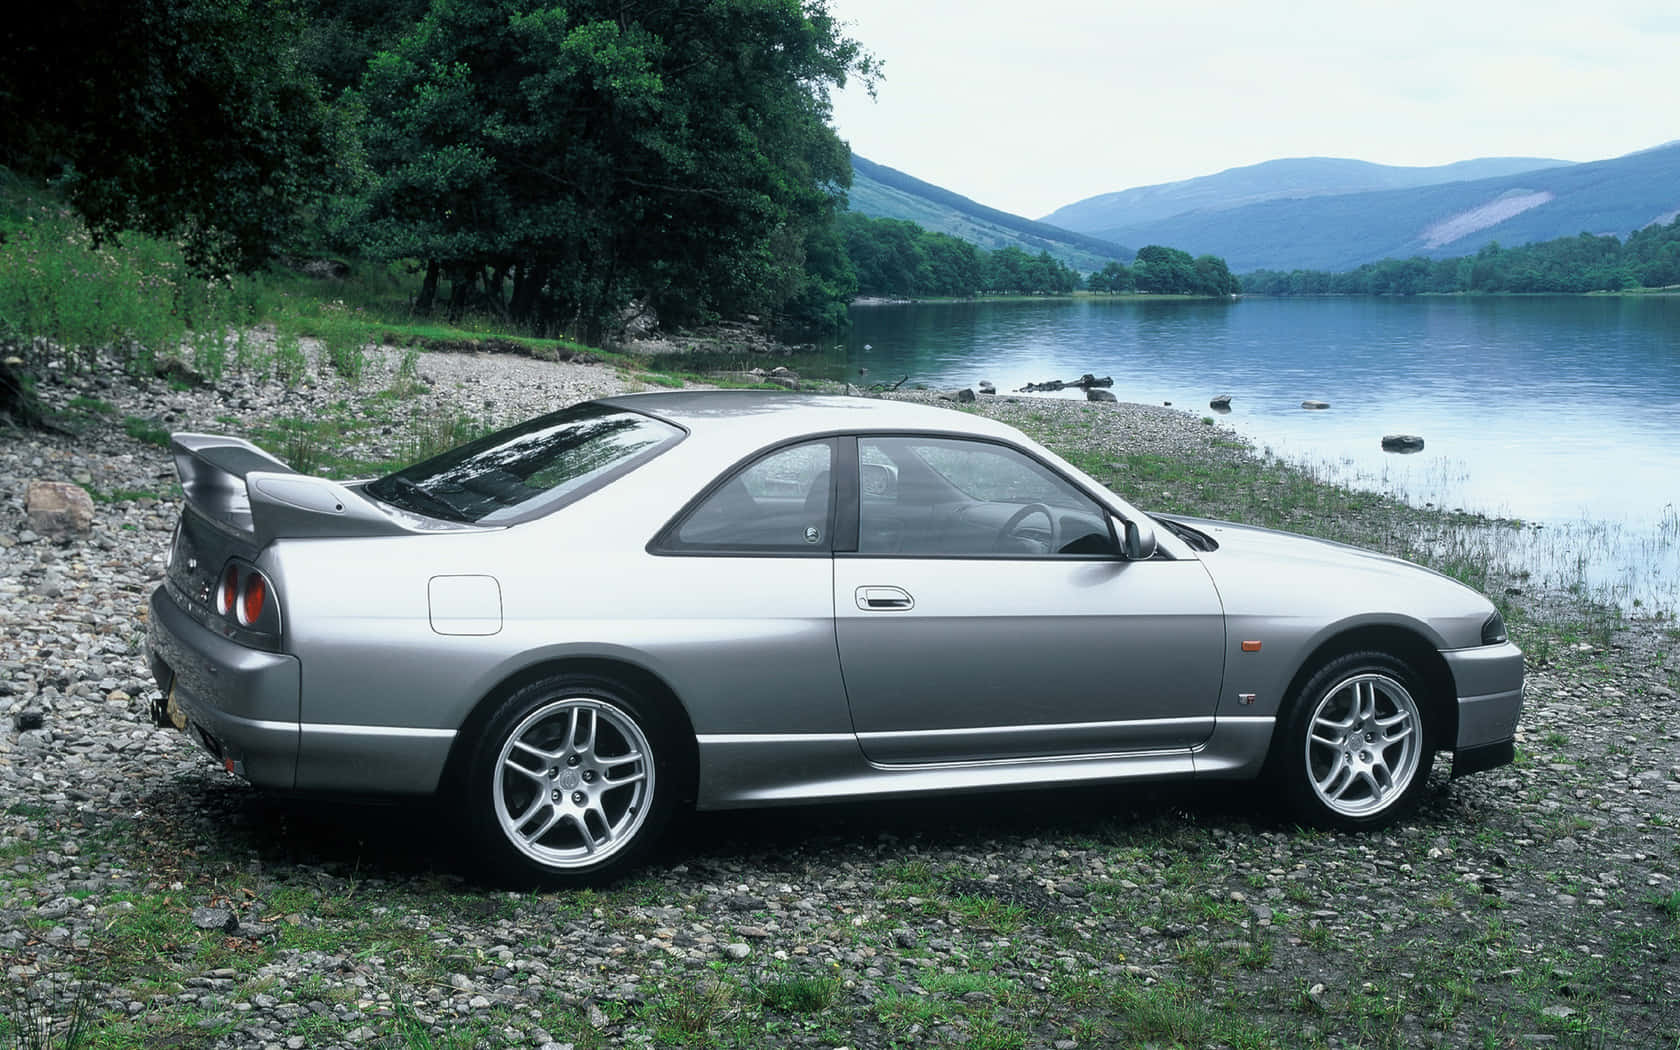 The Iconic Nissan R33 Gtr - An Unbeatable Classic Wallpaper